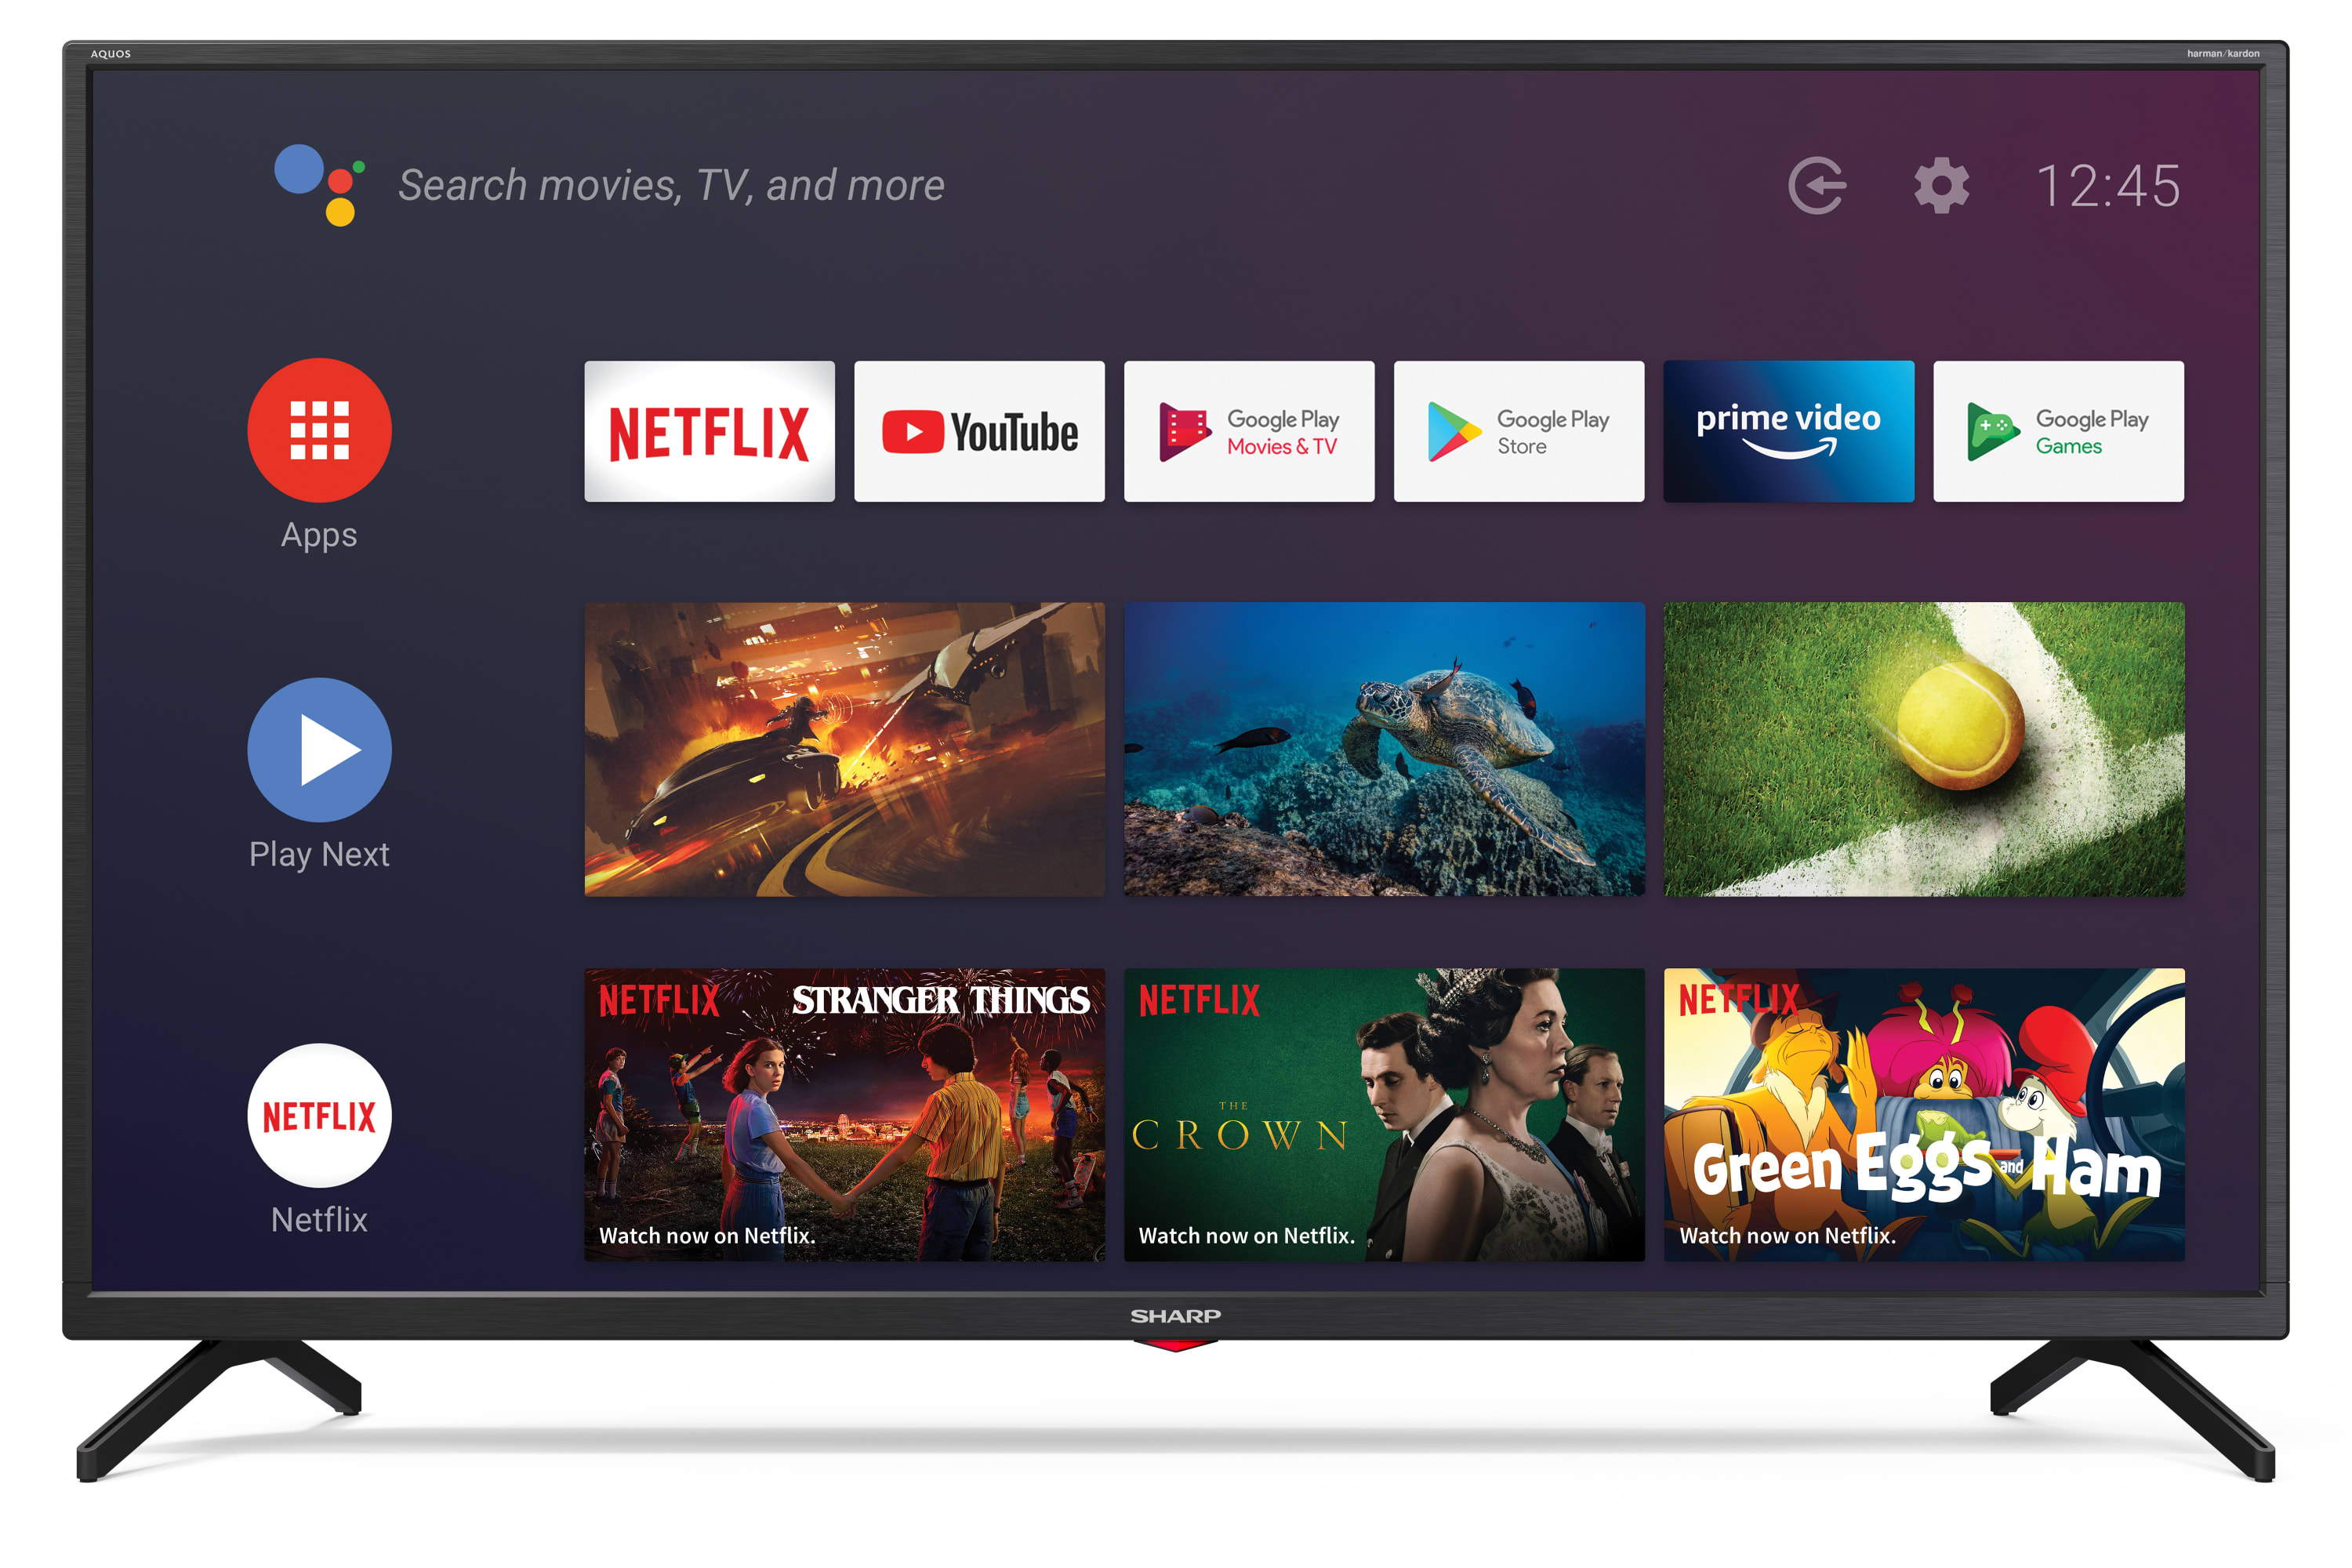 Android TV 4K UHD - 43" ANDROID TV™ ULTRA HD 4K